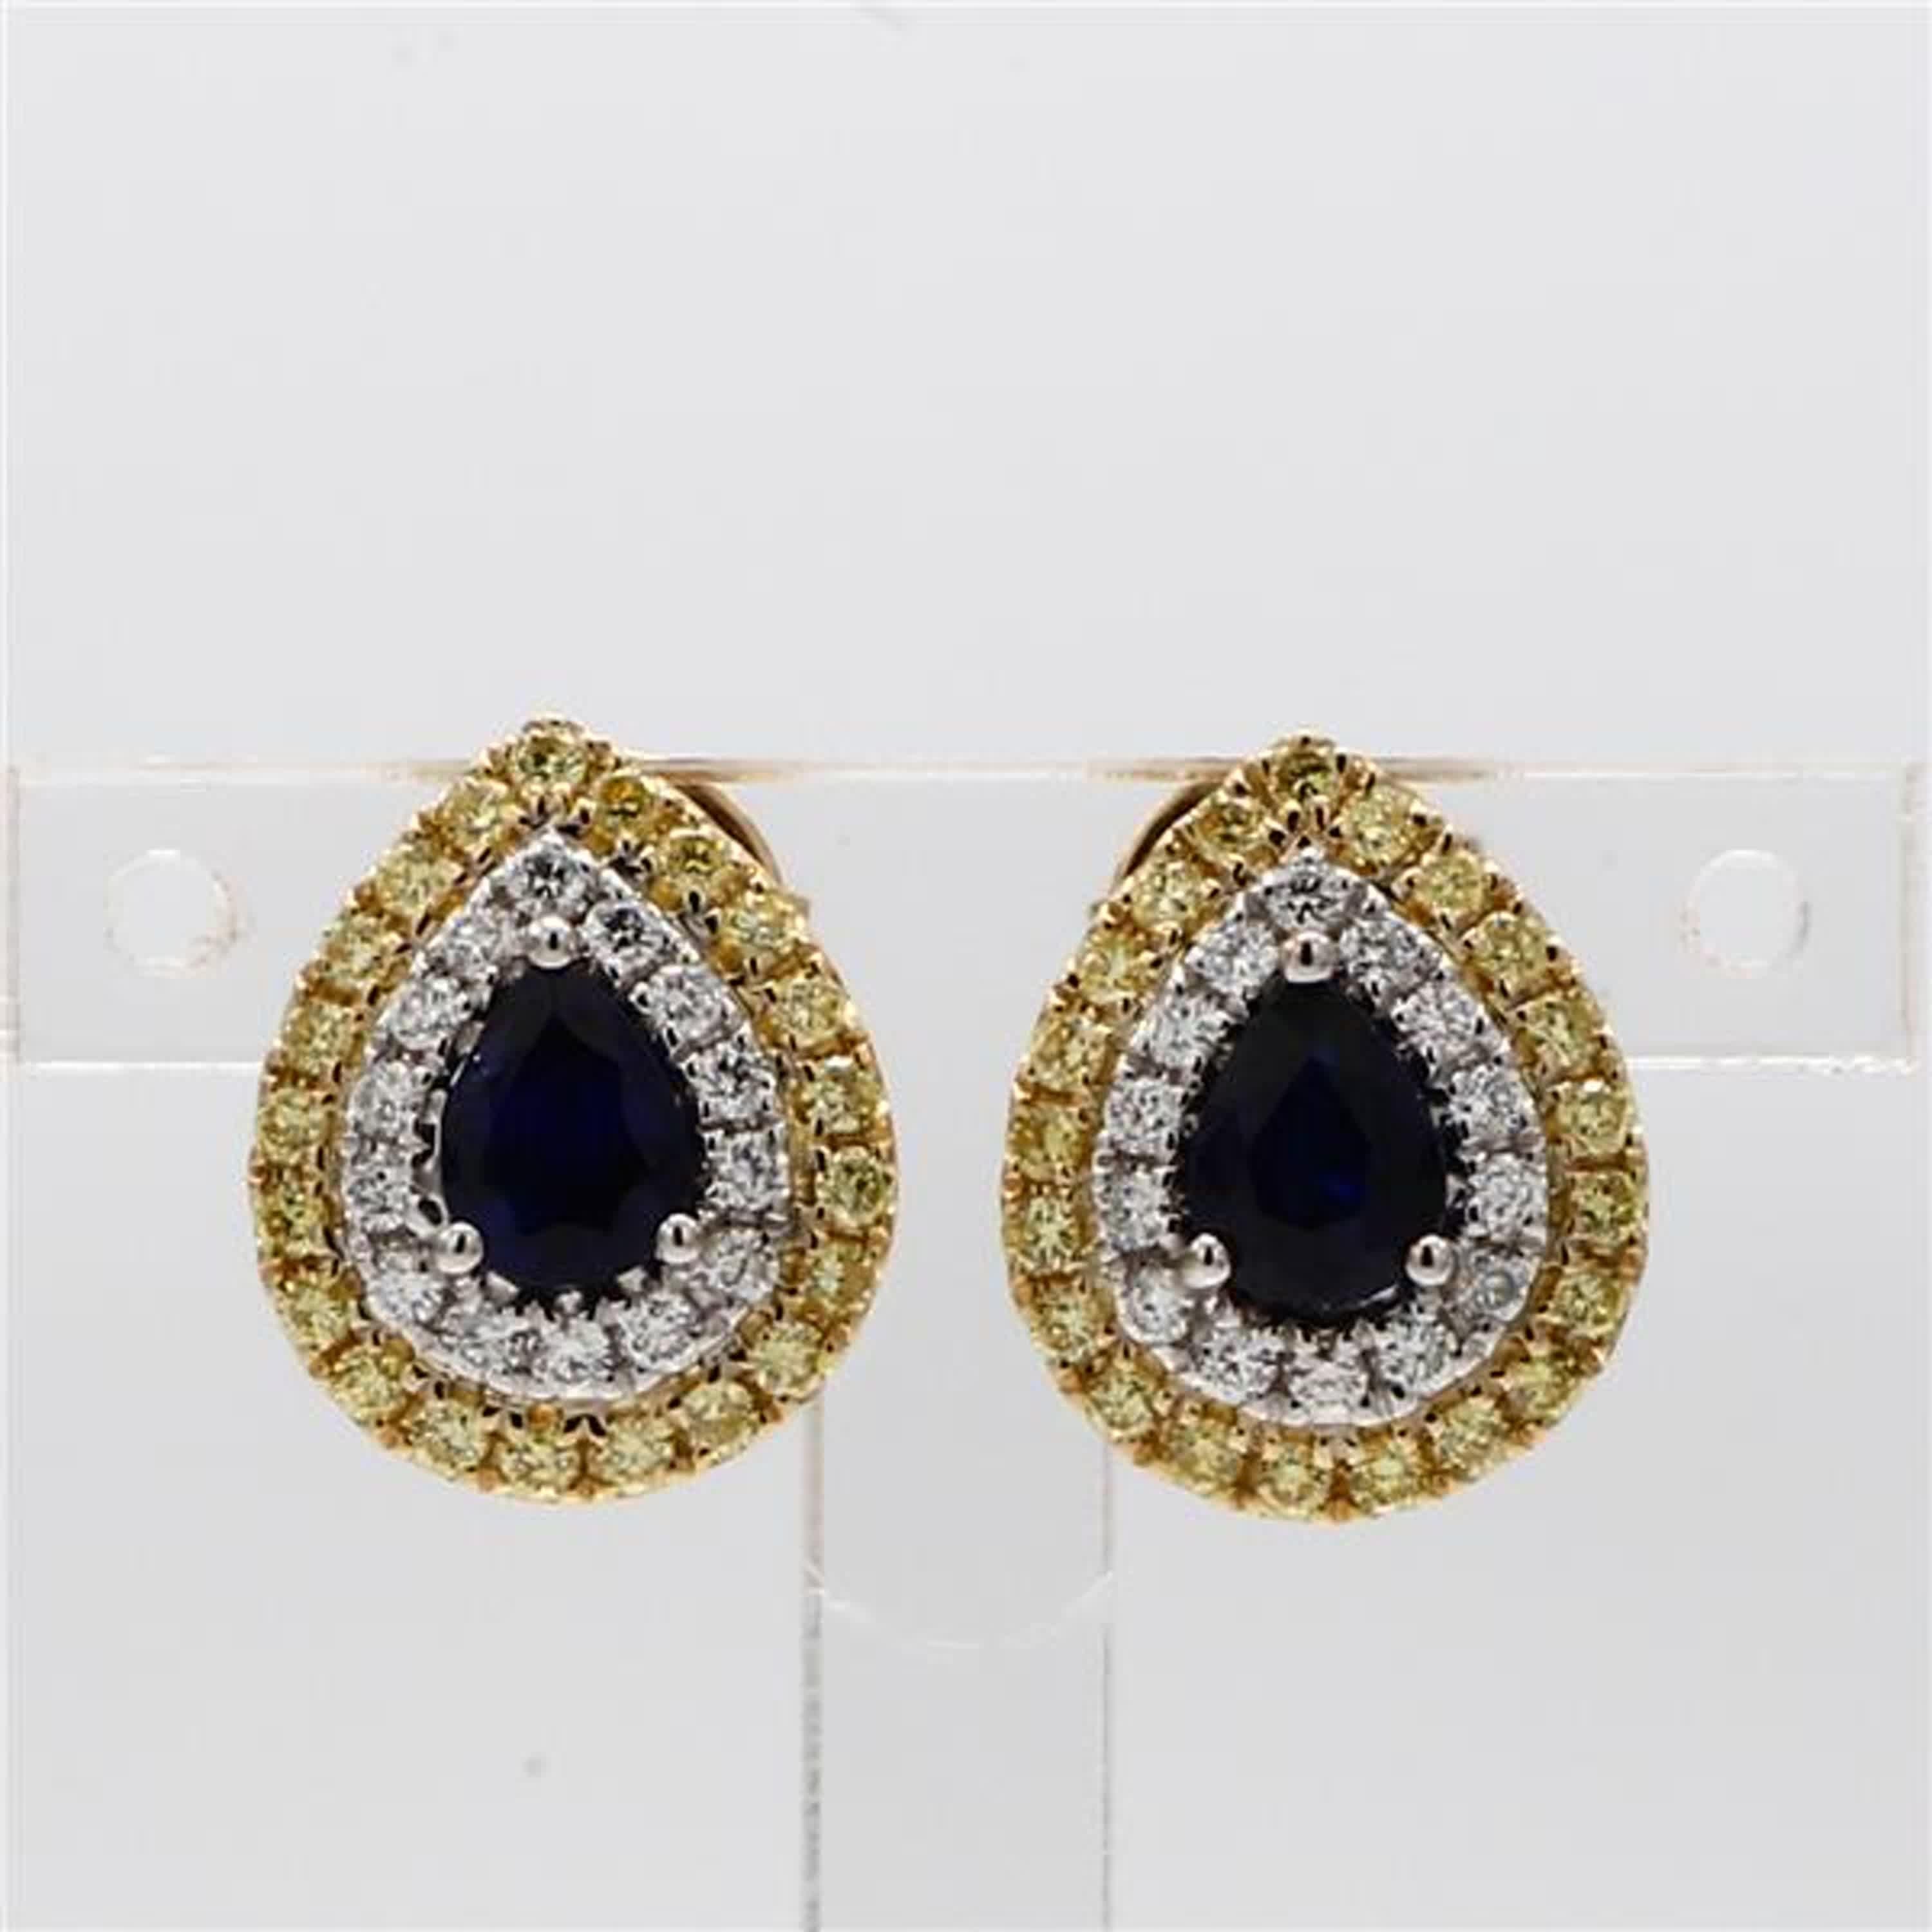 RareGemWorld's classic sapphire earrings. Mounted in a beautiful 18K Yellow and White Gold setting with natural pear cut blue sapphires. The sapphires are surrounded by natural round yellow diamond melee and natural round white diamond melee. These